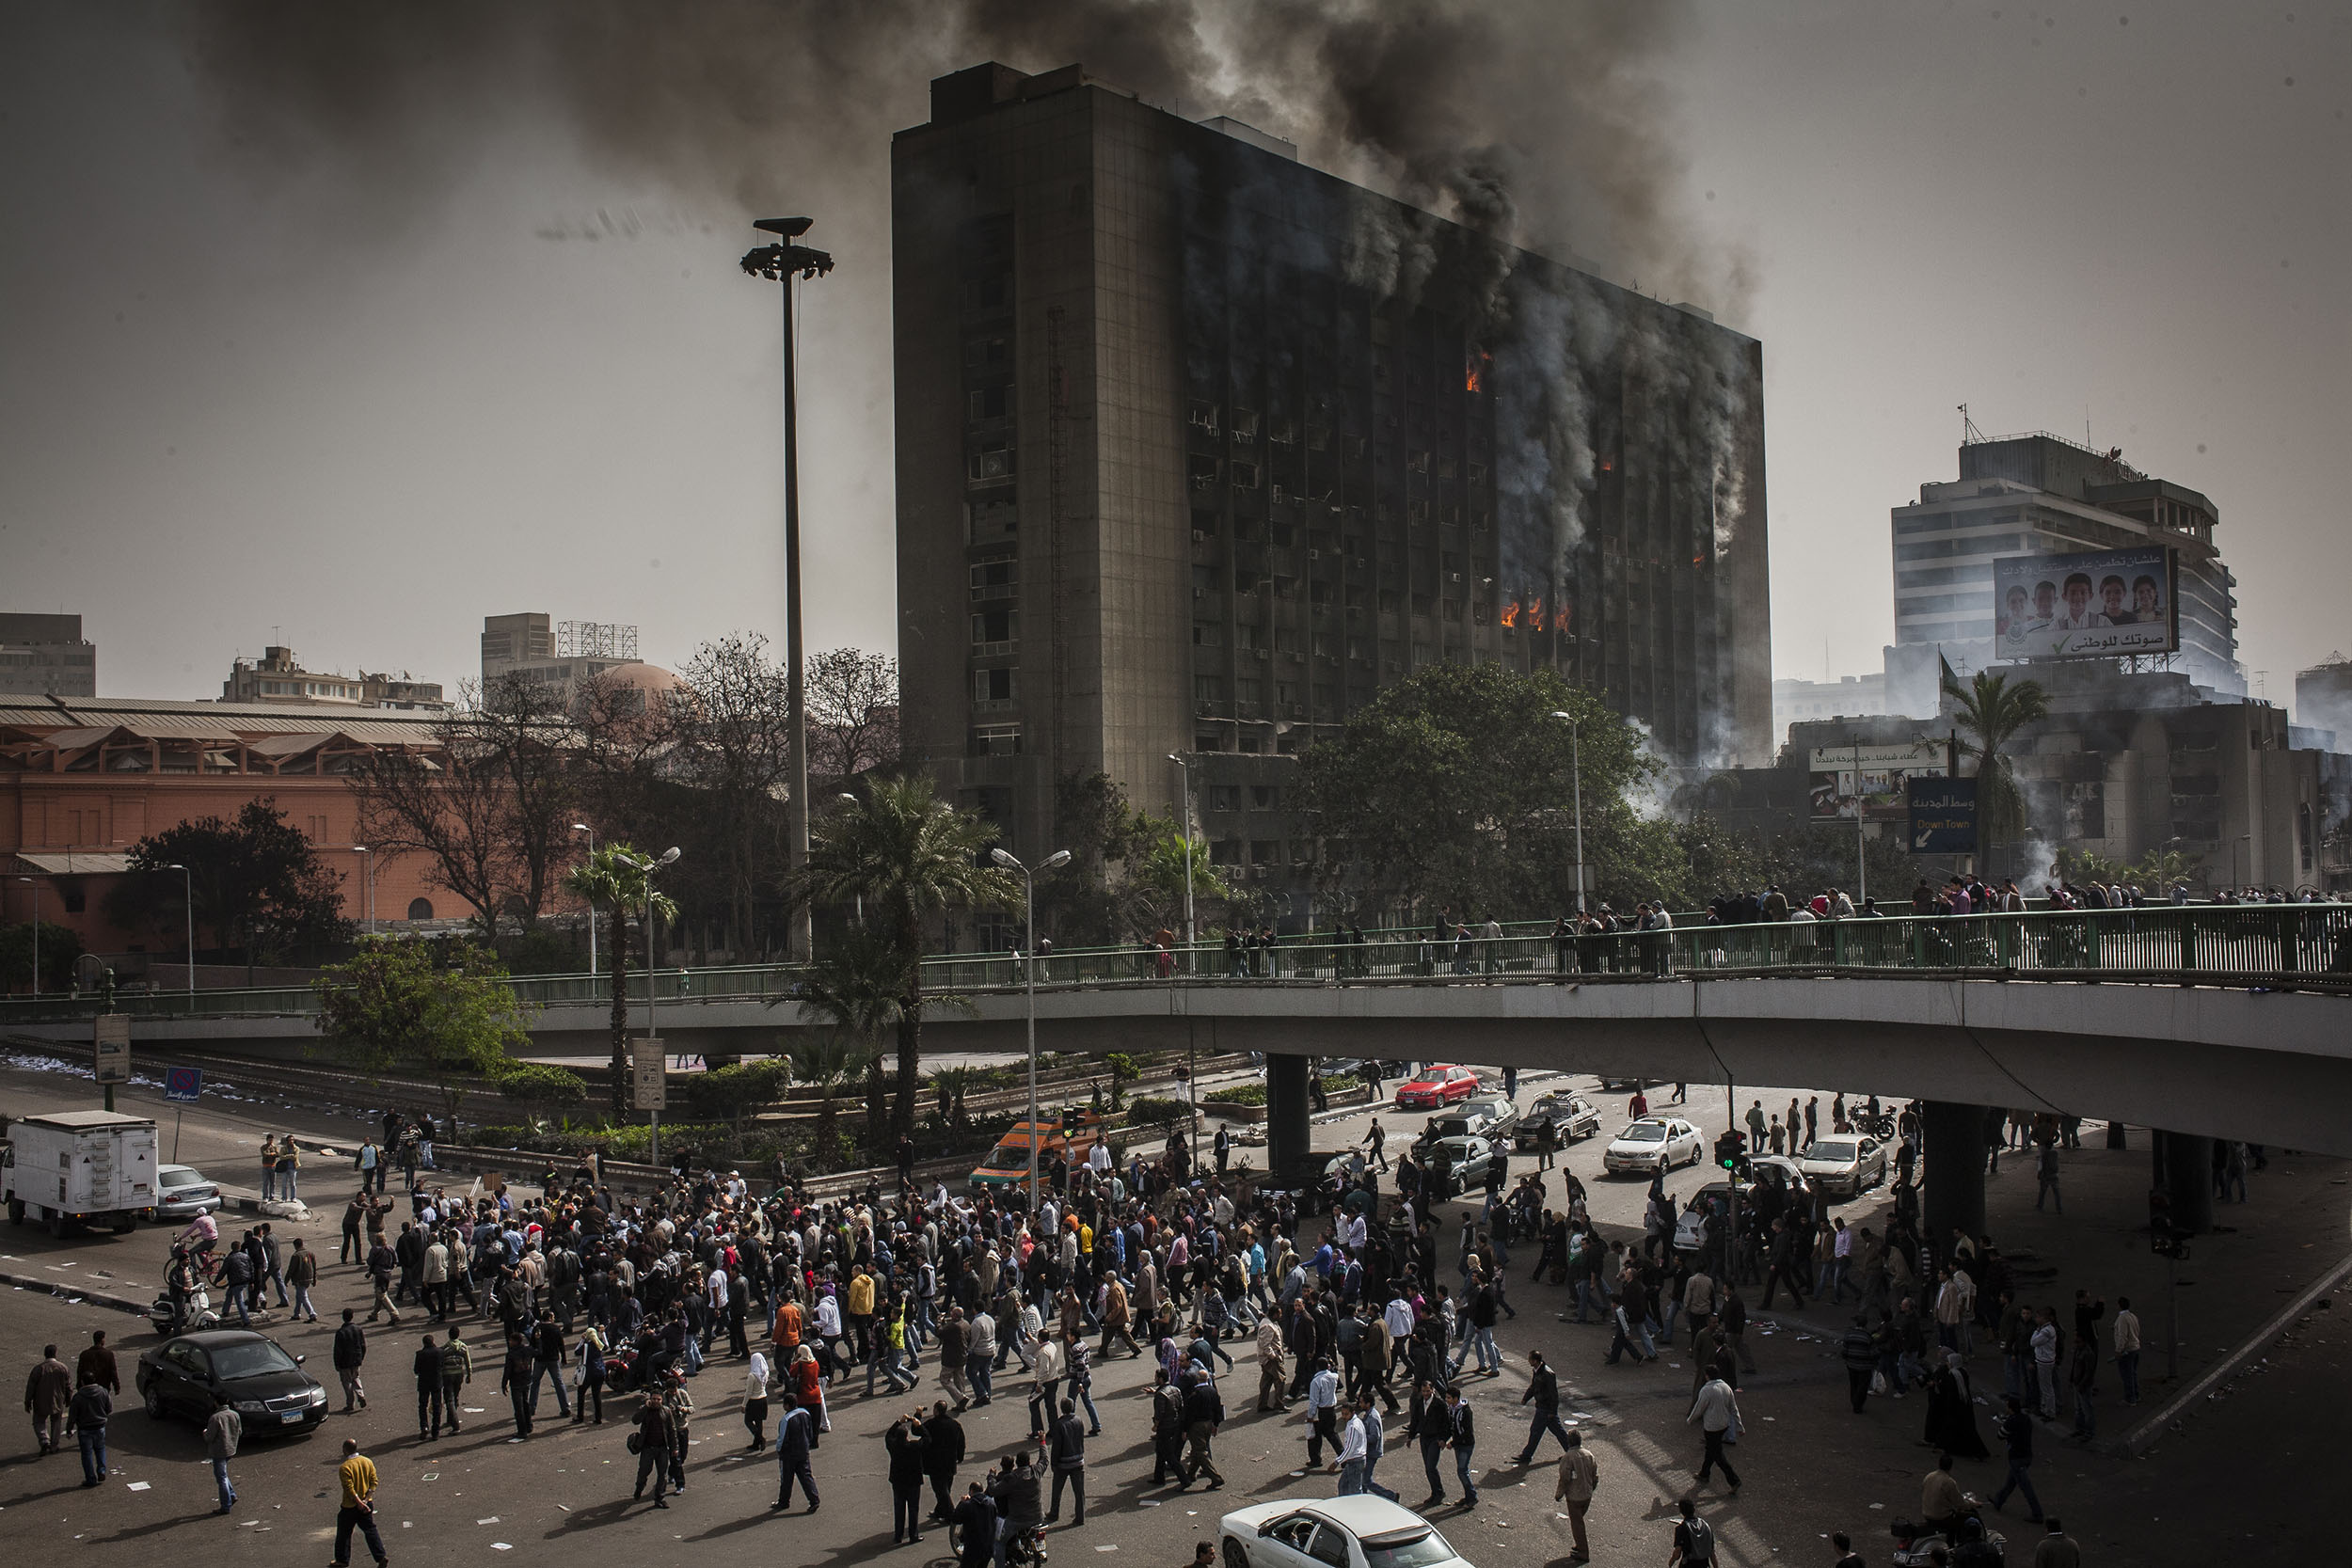  The ruling National Democratic party building burns the morning after being set on fire as protesters gather beneath.  